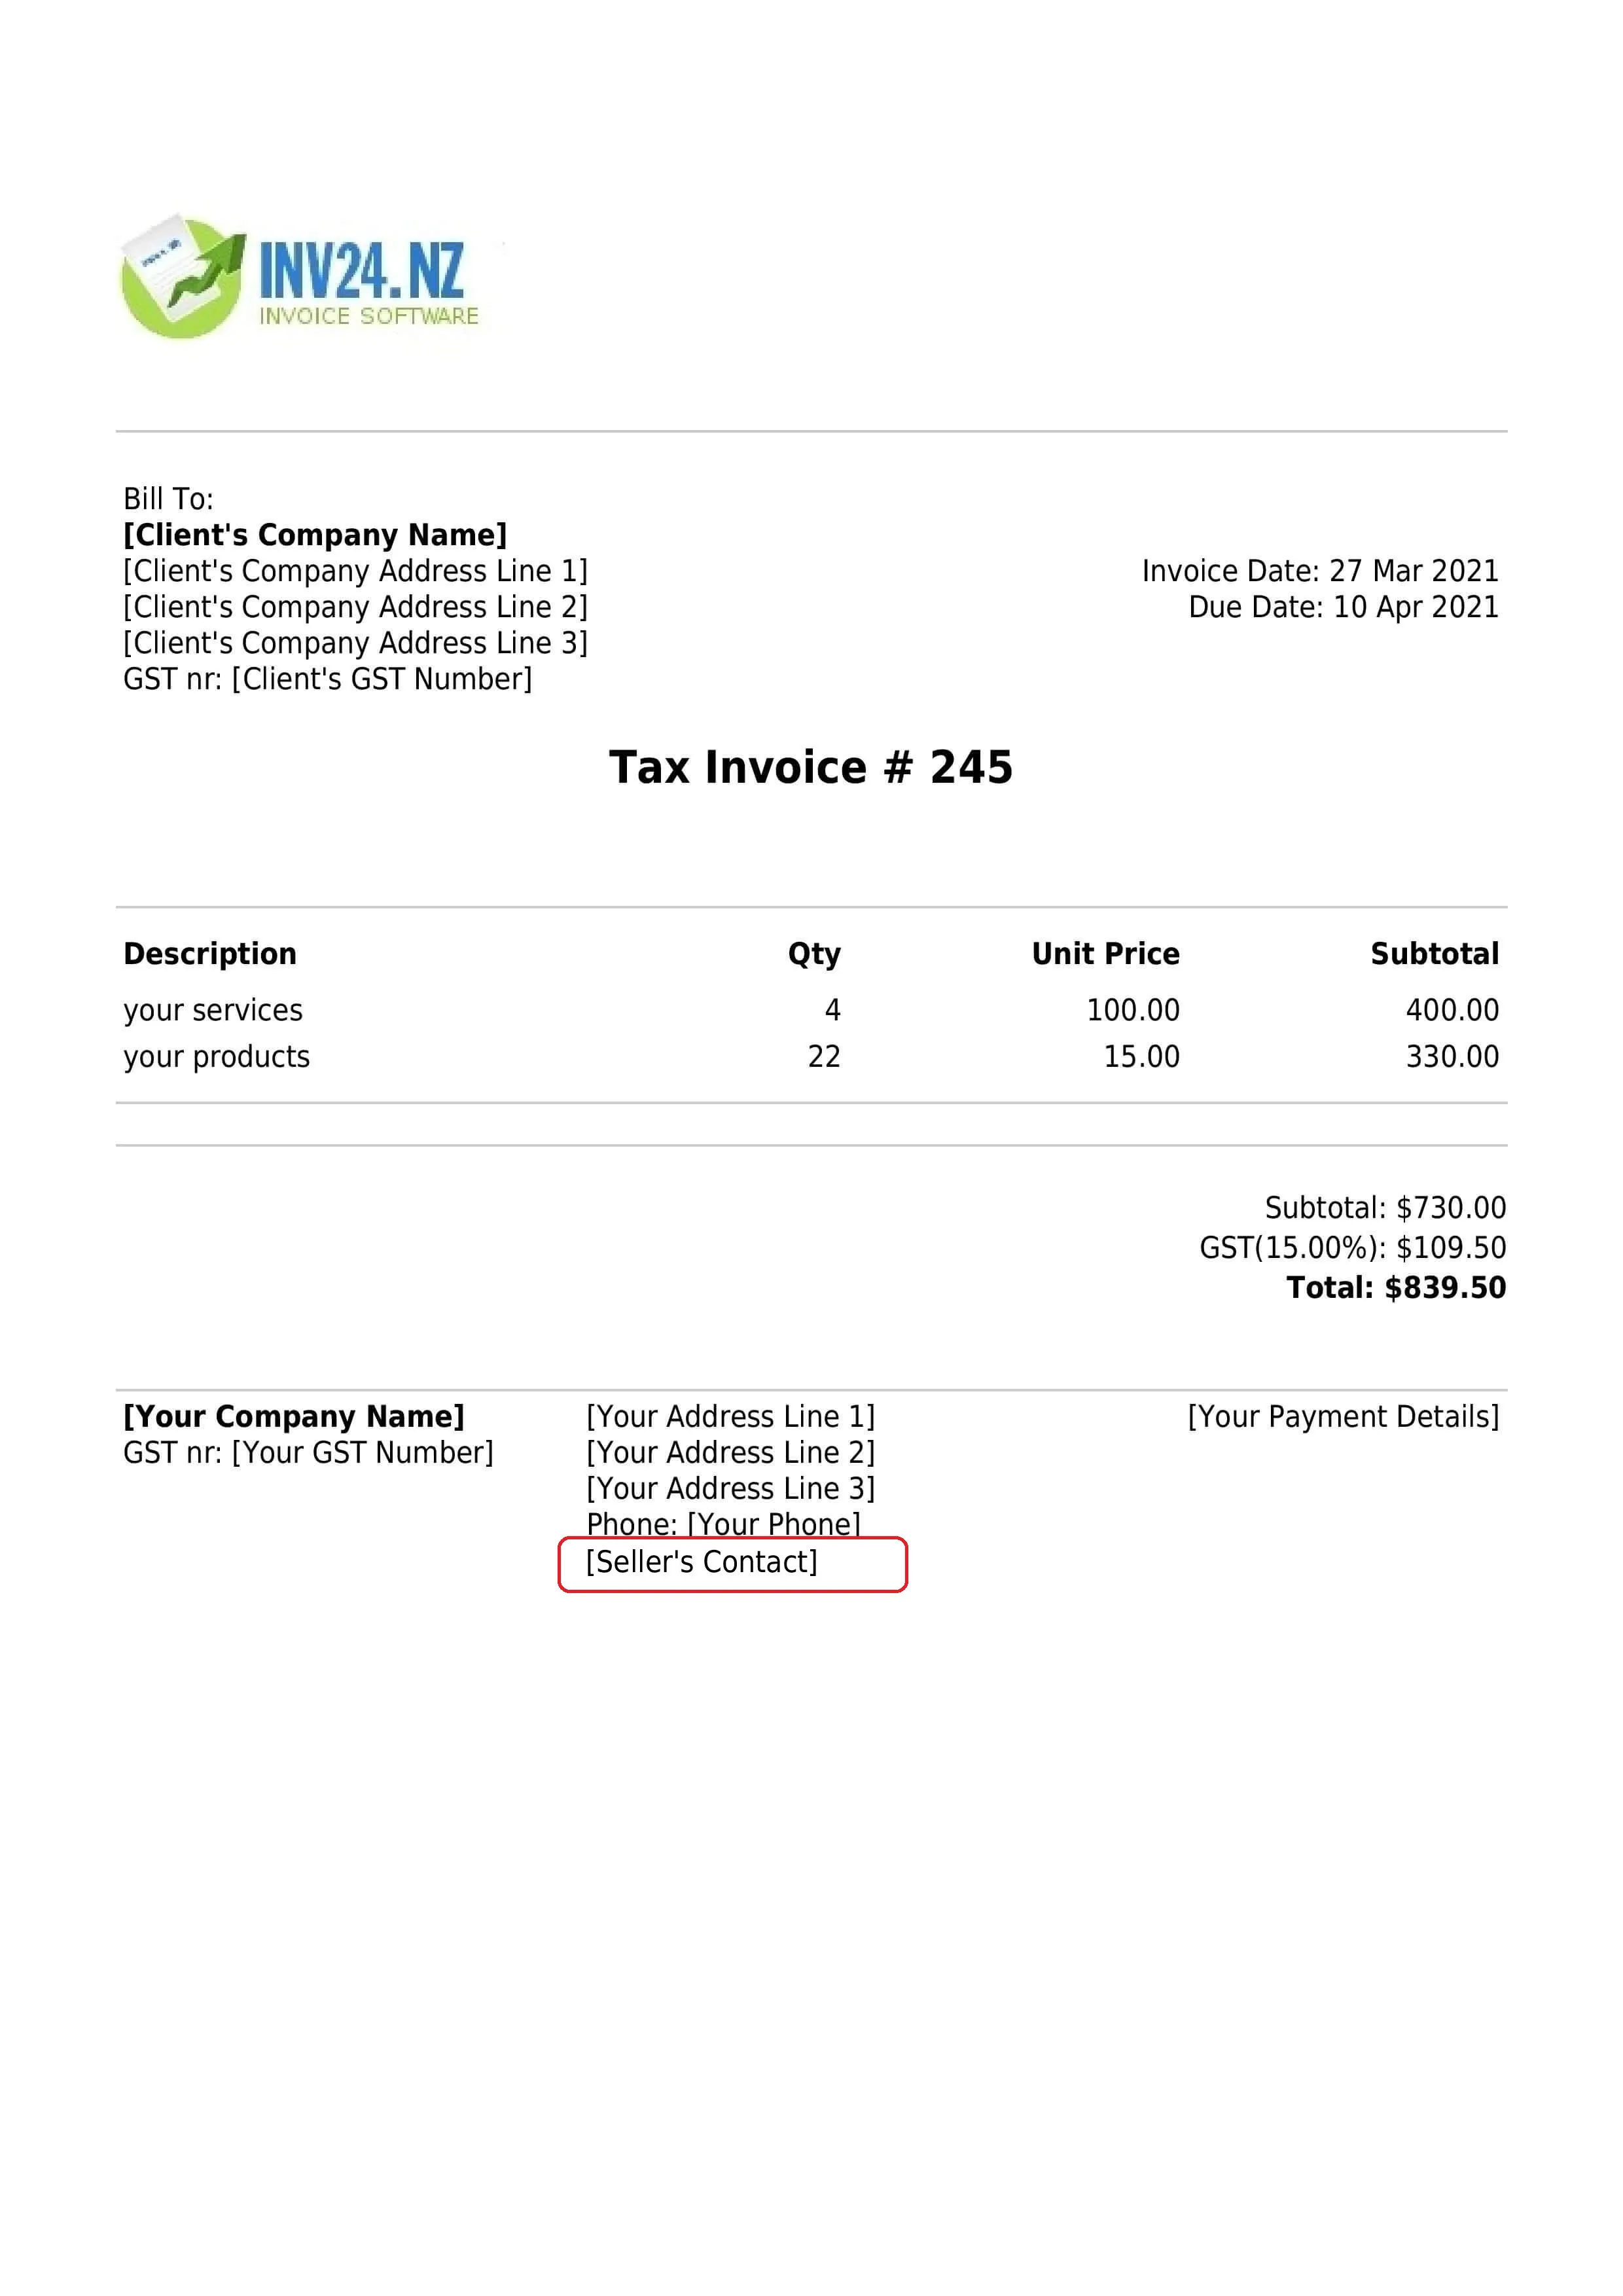 seller's contact on the invoice